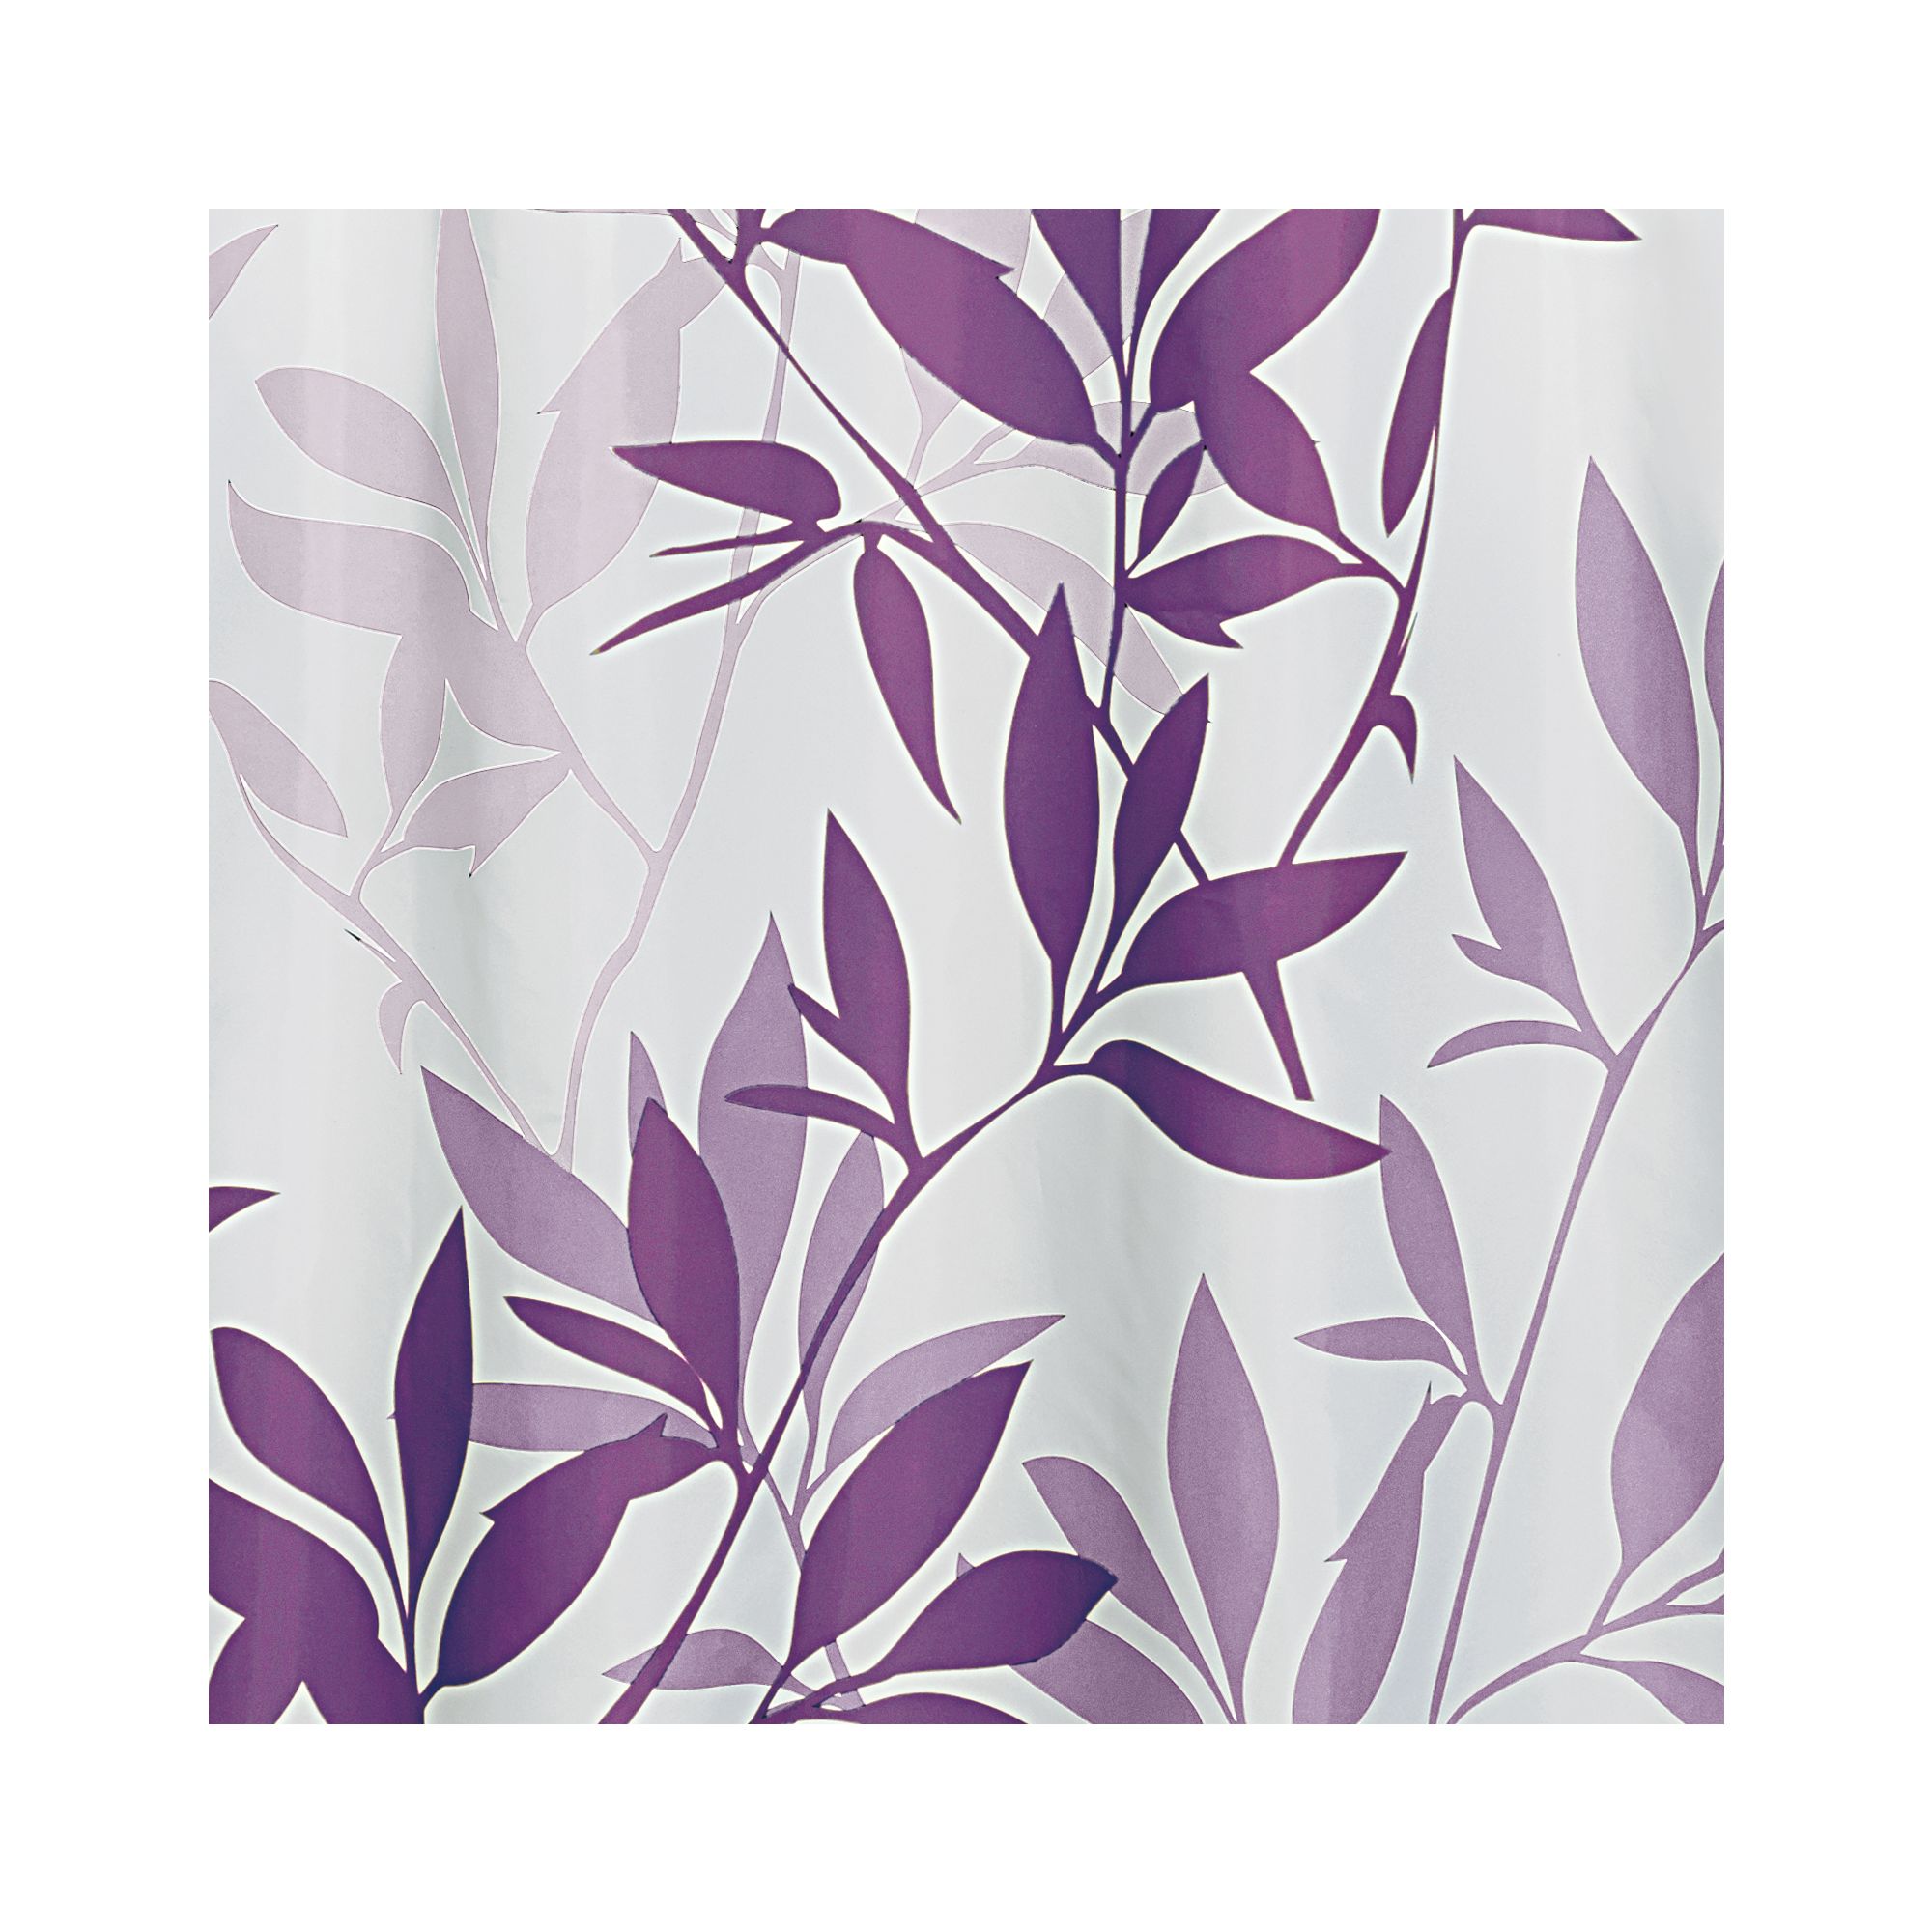 InterDesign Purple Trees Polyester Shower Curtain, 72" x 72" - image 3 of 5